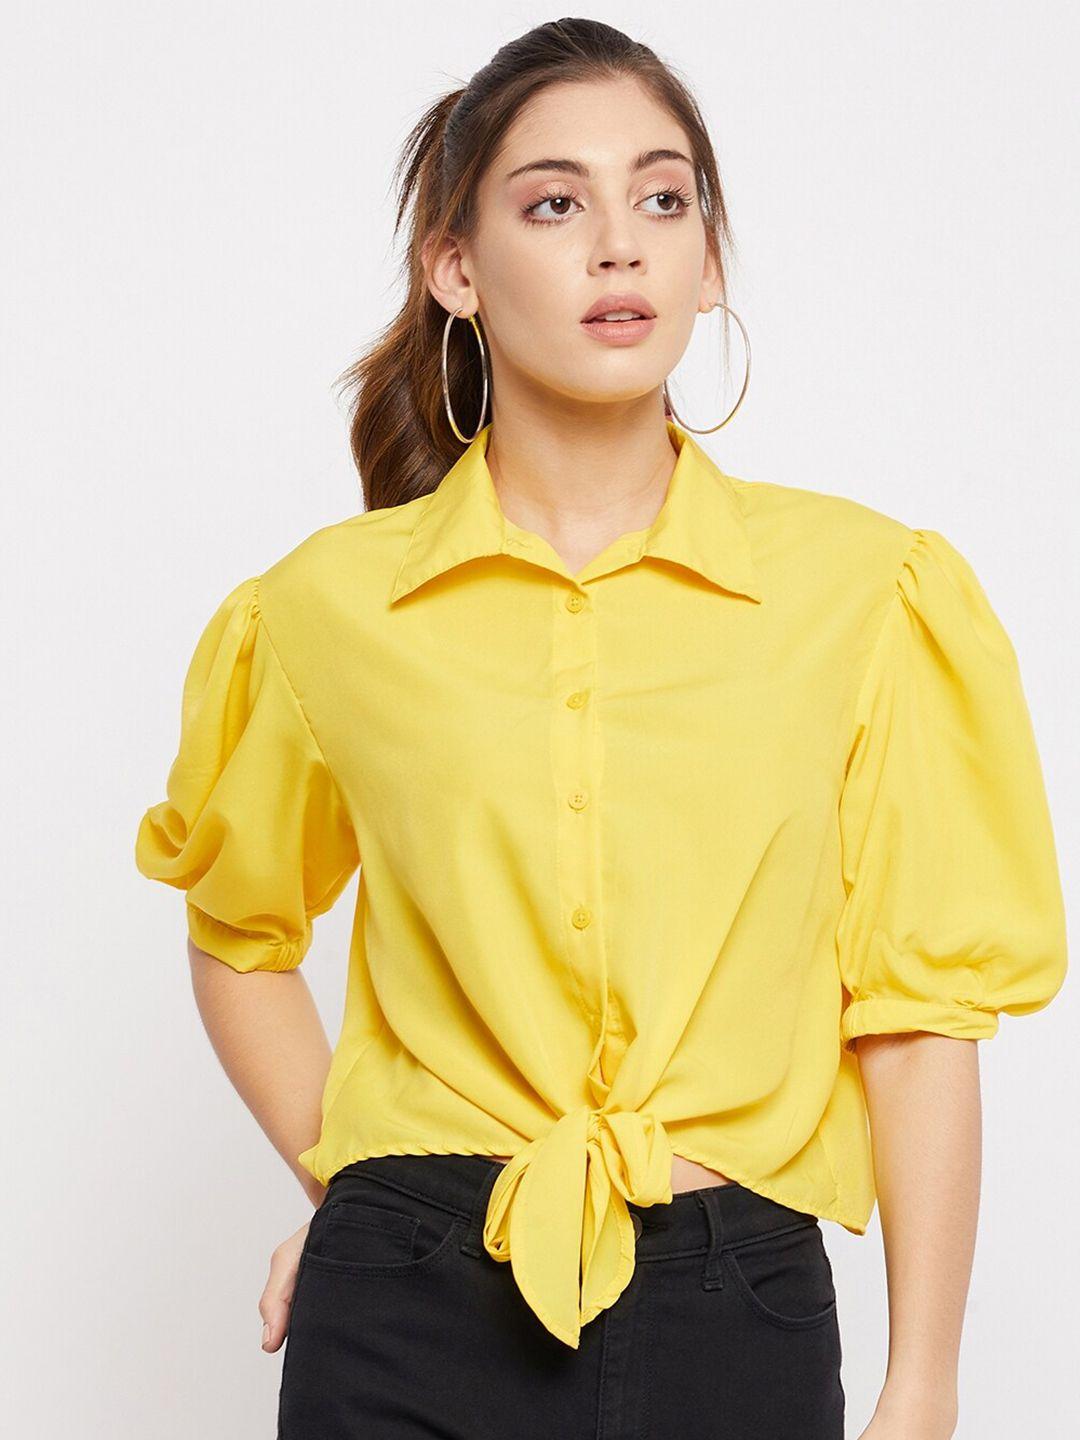 color cocktail women mustard yellow crepe shirt style crop top